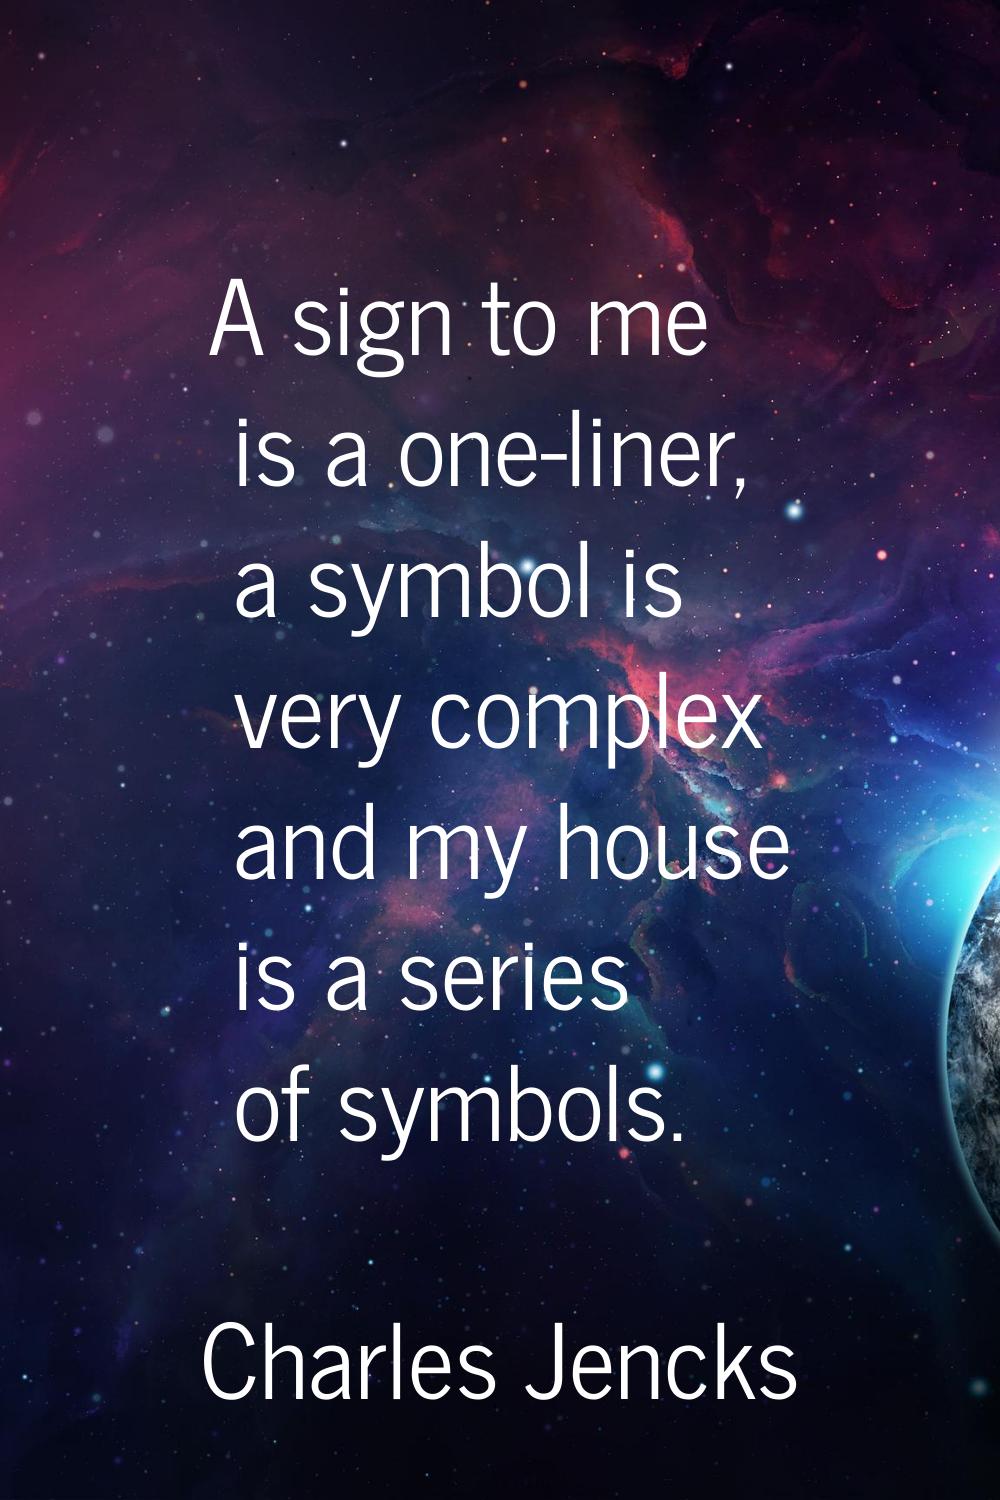 A sign to me is a one-liner, a symbol is very complex and my house is a series of symbols.